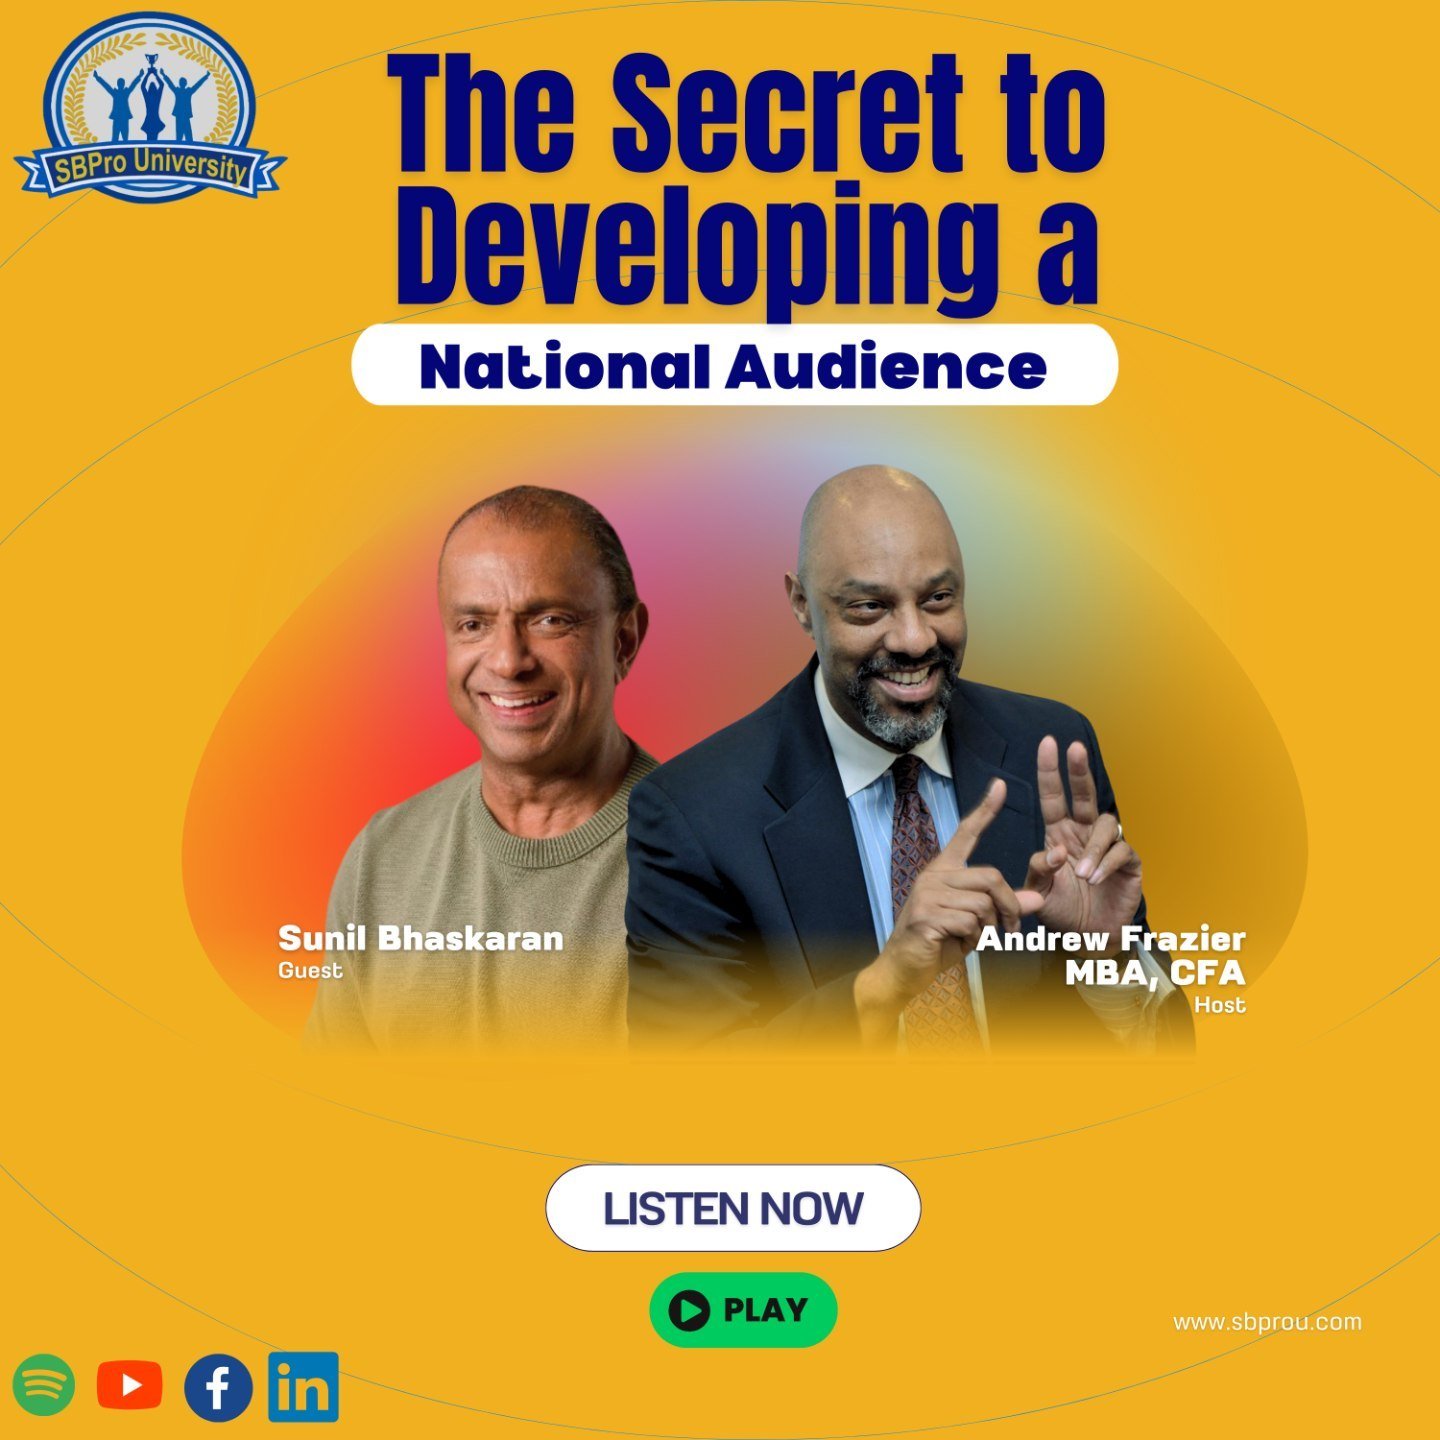 The Secret To Developing A National Audience

Listen here: https://podcasters.spotify.com/pod/show/live-at-805/episodes/The-Secret-To-Developing-A-National-Audience-e2ito39

The Secret To Developing A National Audience is covered in this podio, along